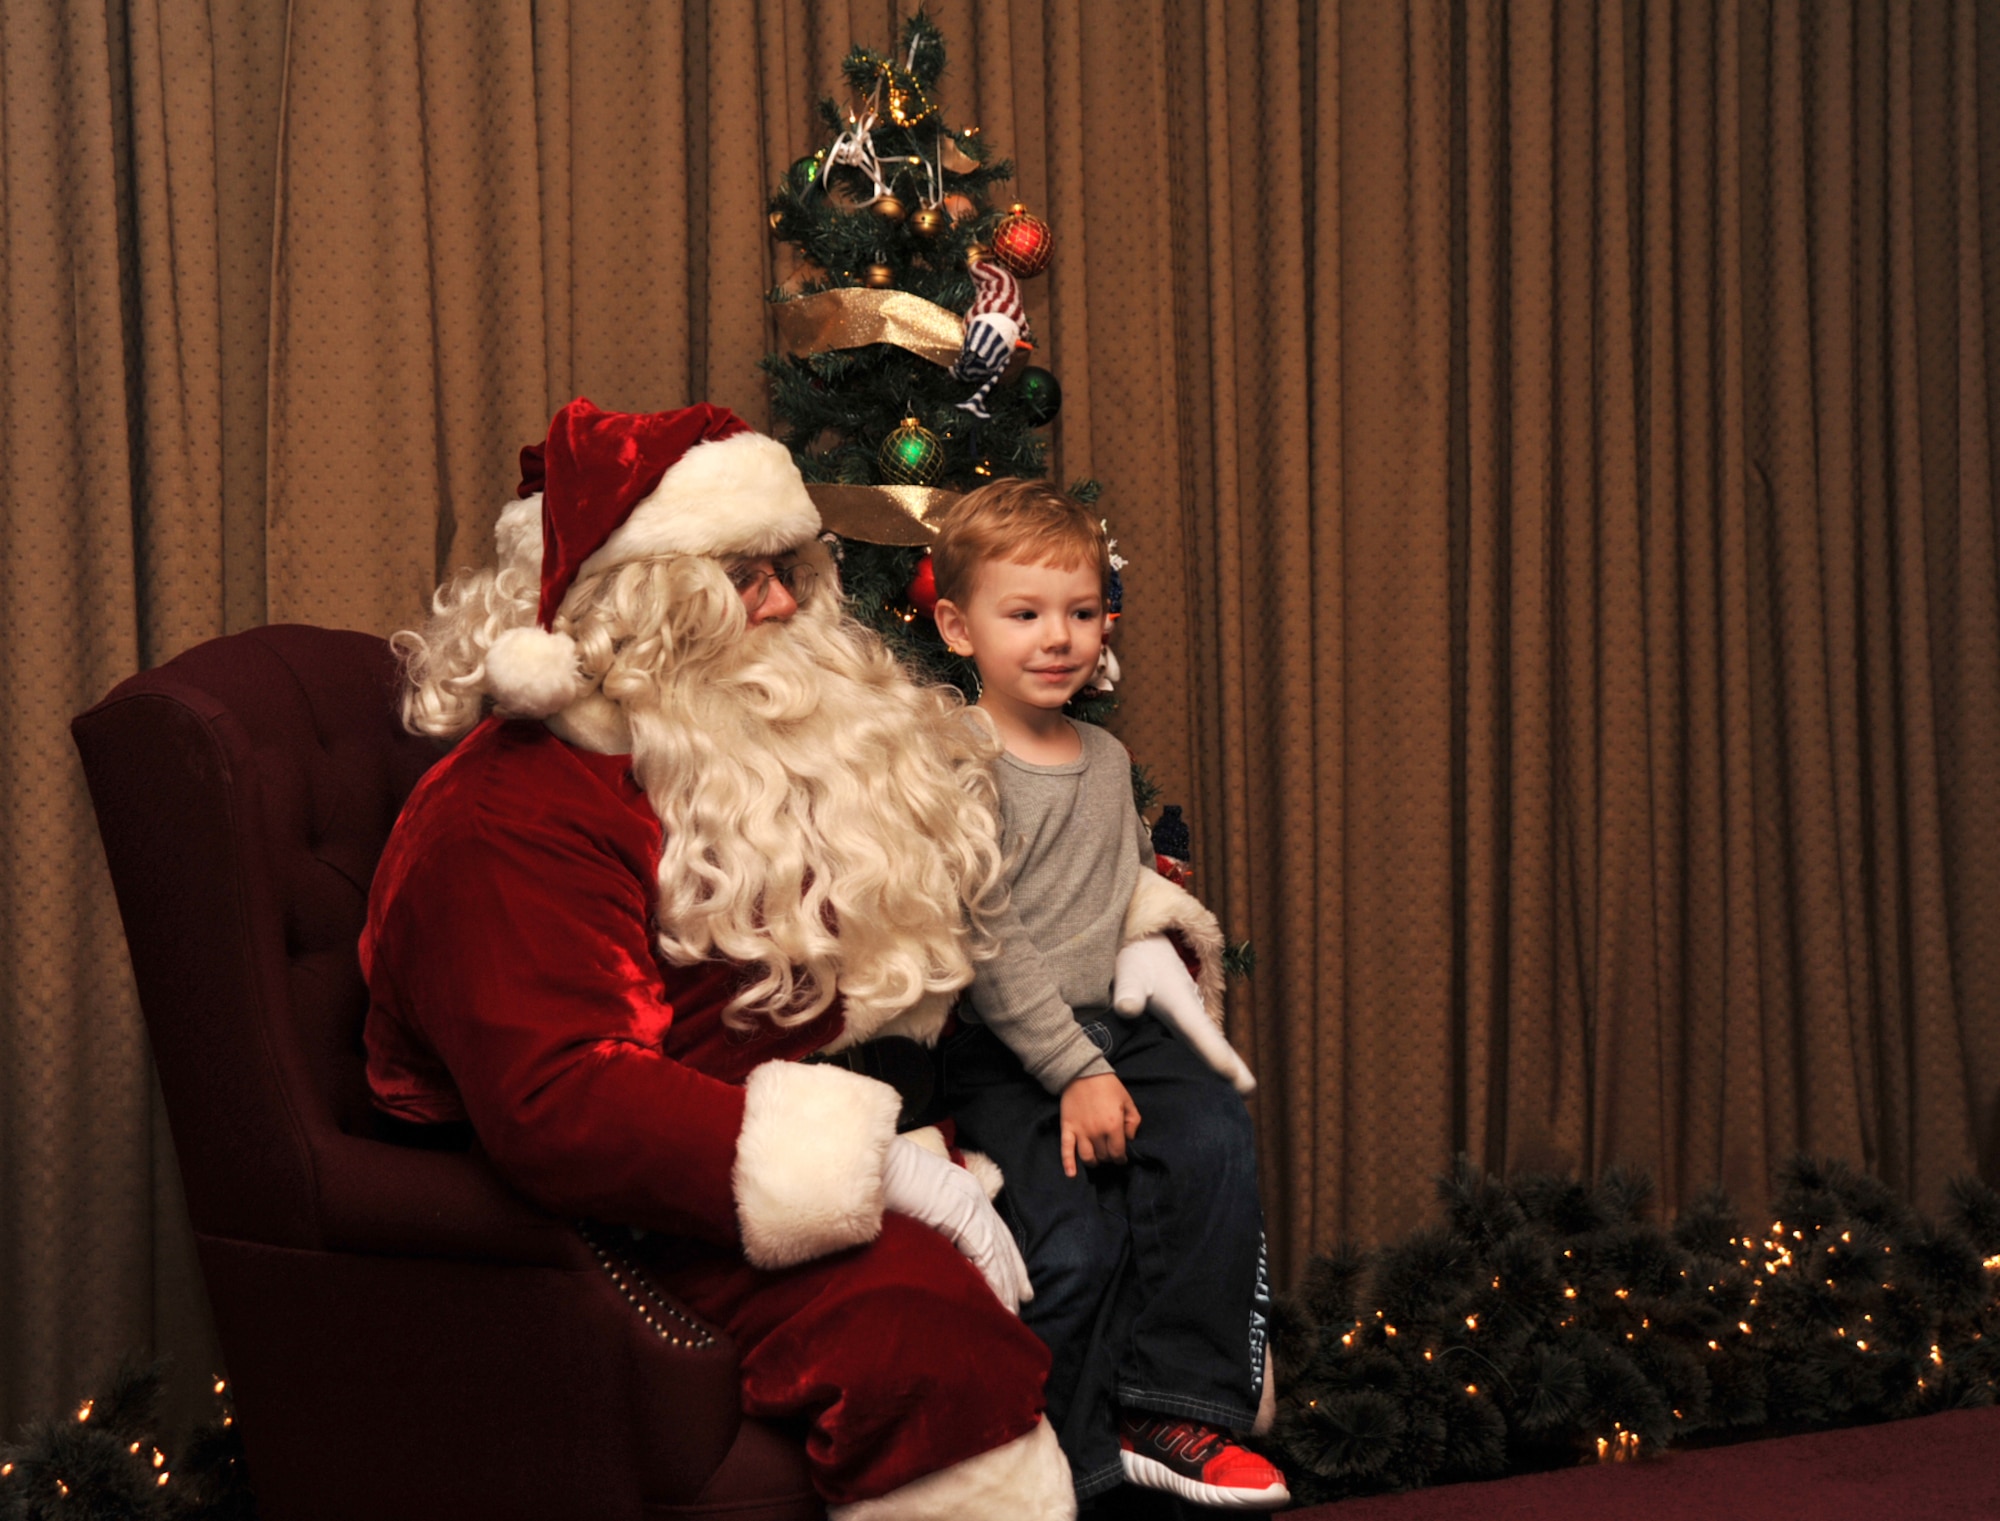 Jace Economides, 4, sits on Santa’s lap at the Holiday Tree Lighting ceremony on Grand Forks Air Force Base, North Dakota, Dec. 7, 2015. Santa arrived at the club escorted by the Grand Forks AFB Fire Department on a fire truck and stayed to listen to children’s Christmas wishes. (U.S. Air Force photo by Senior Airman Bonnie Grantham/released)